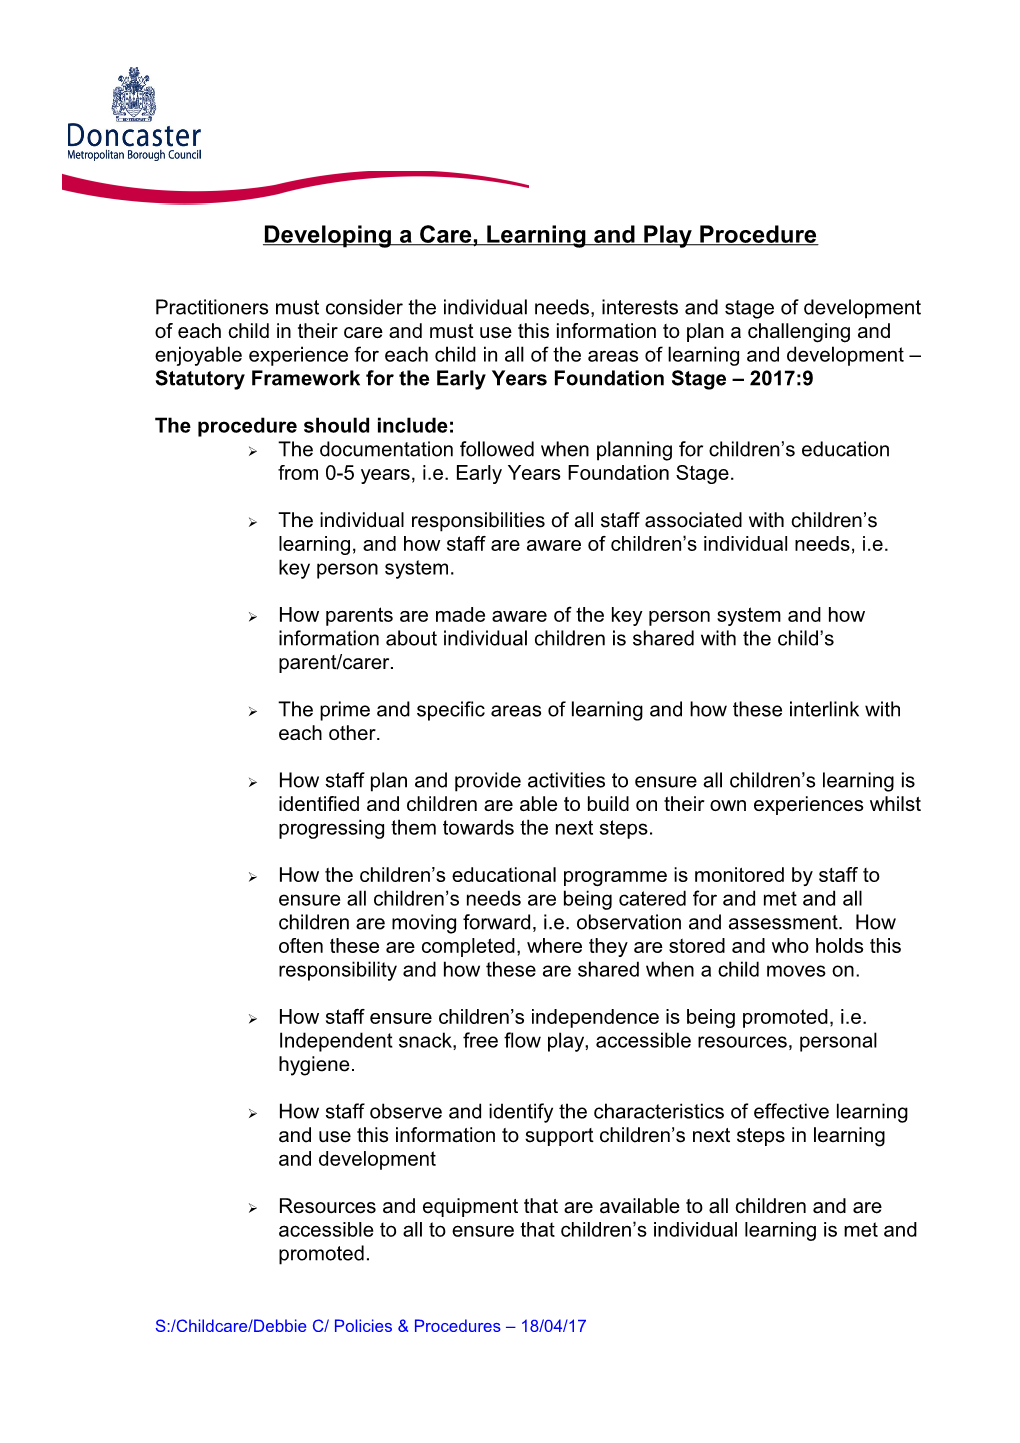 Developing a Care, Learning and Play Procedure